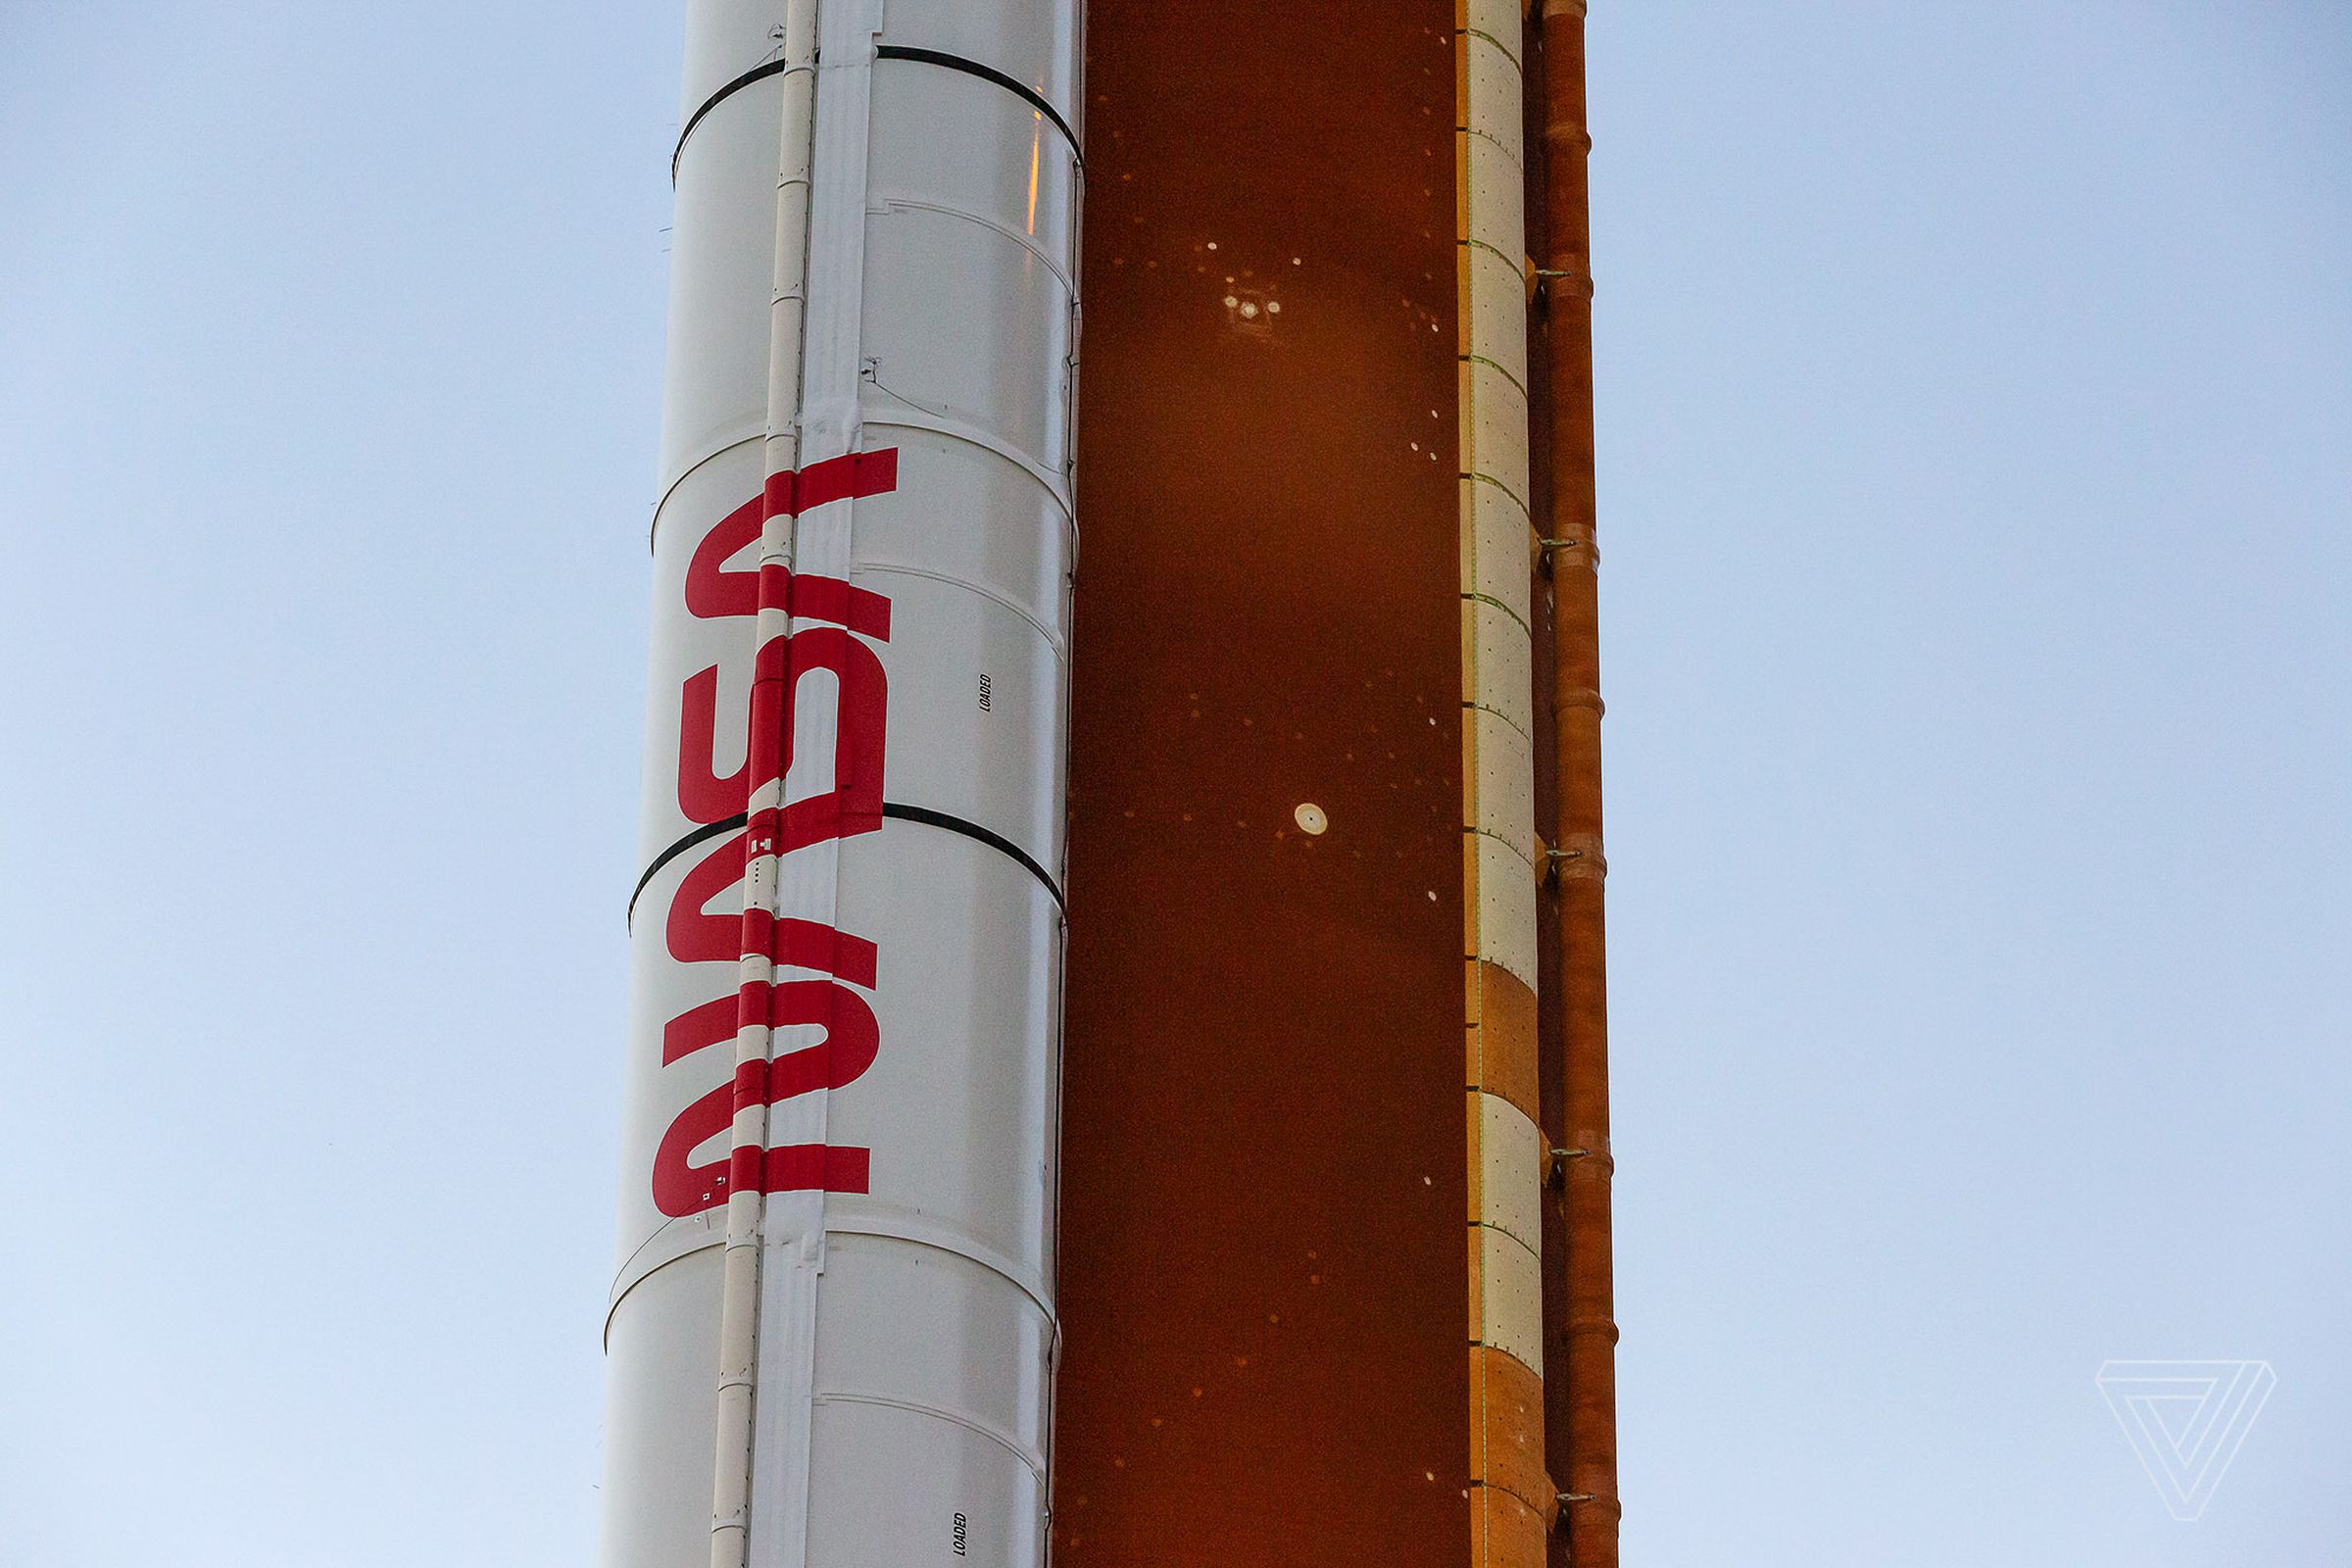 NASA’s Worm logo adorns the sides of the solid rocket boosters, which will help to provide extra thrust during liftoff.